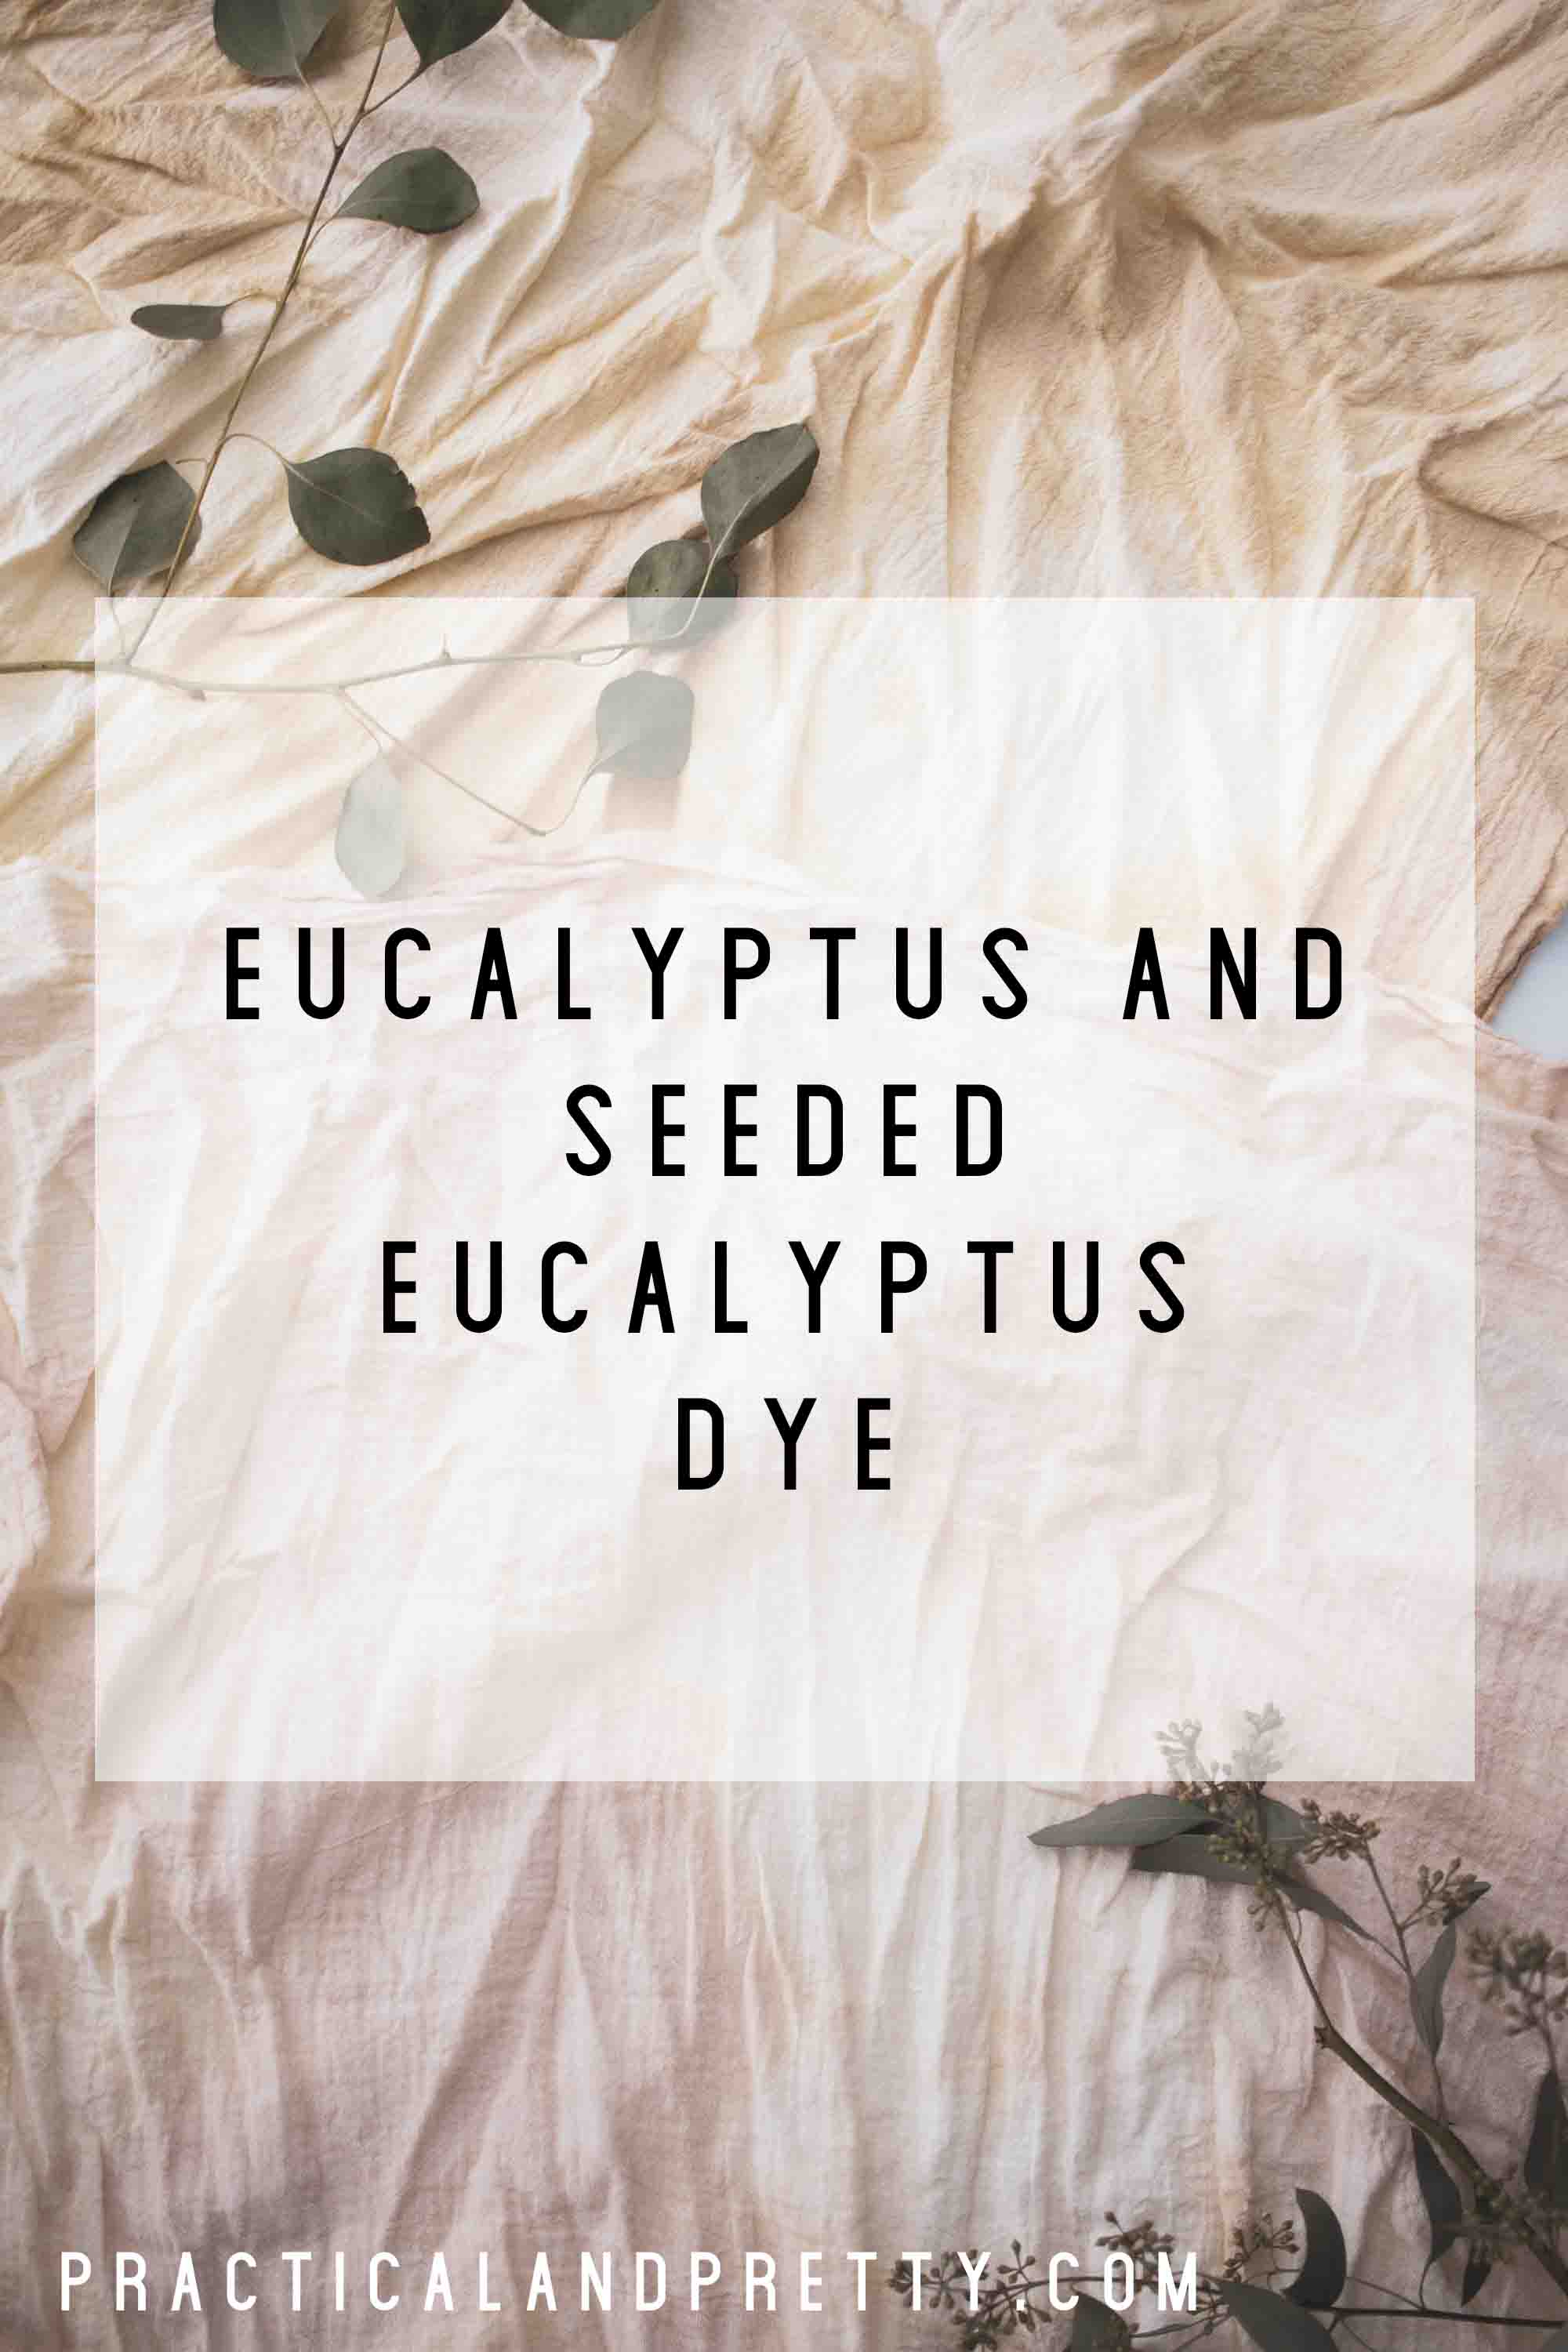 Seeded eucalyptus gave me the most beautiful color. So did regular eucalyptus! But they were more different than I thought they'd be.